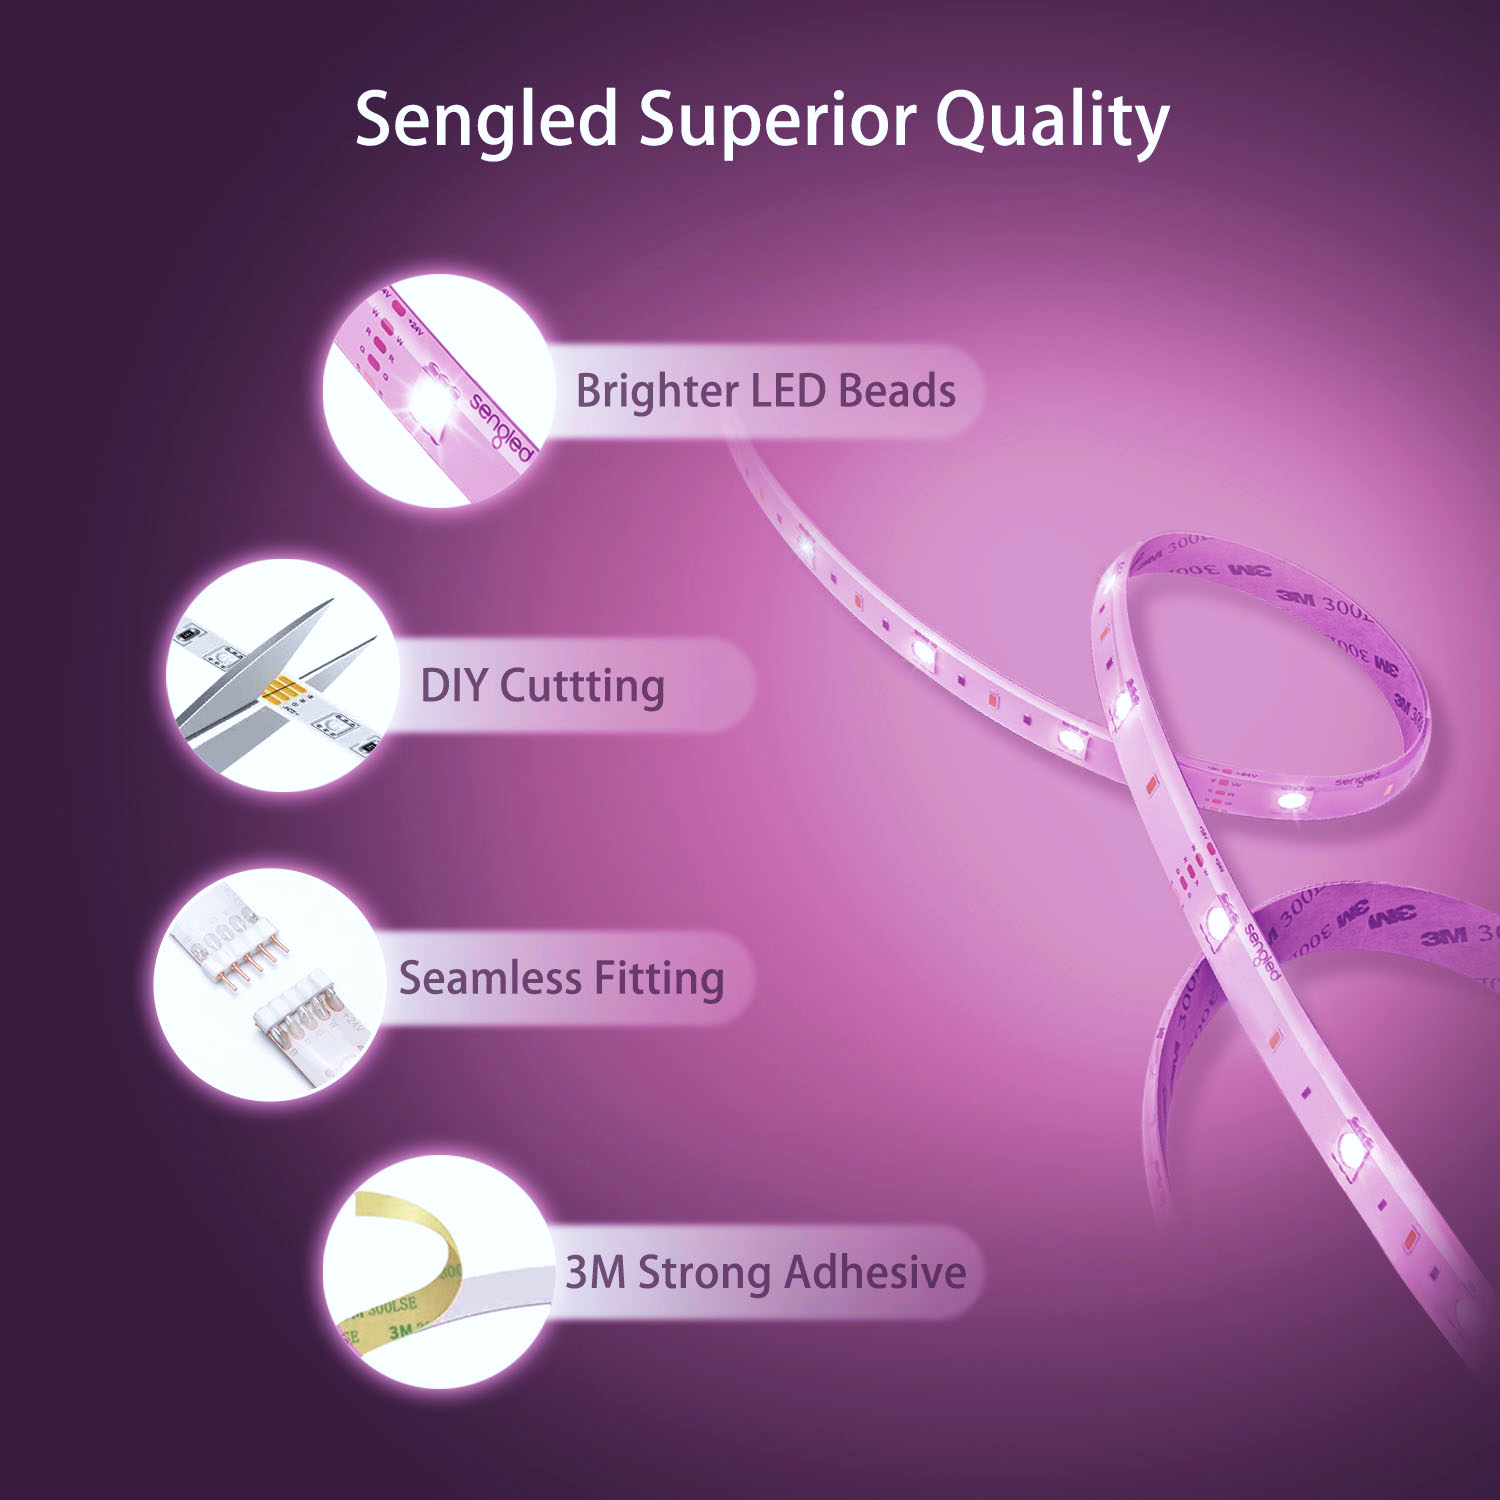 Sengled Superior Quality: The Sengled Zigbee Light Strip is built with superior quality, ensuring long-lasting performance and durability. It features brighter LED beads for improved lighting output and seamless fitting for a sleek and professional look.